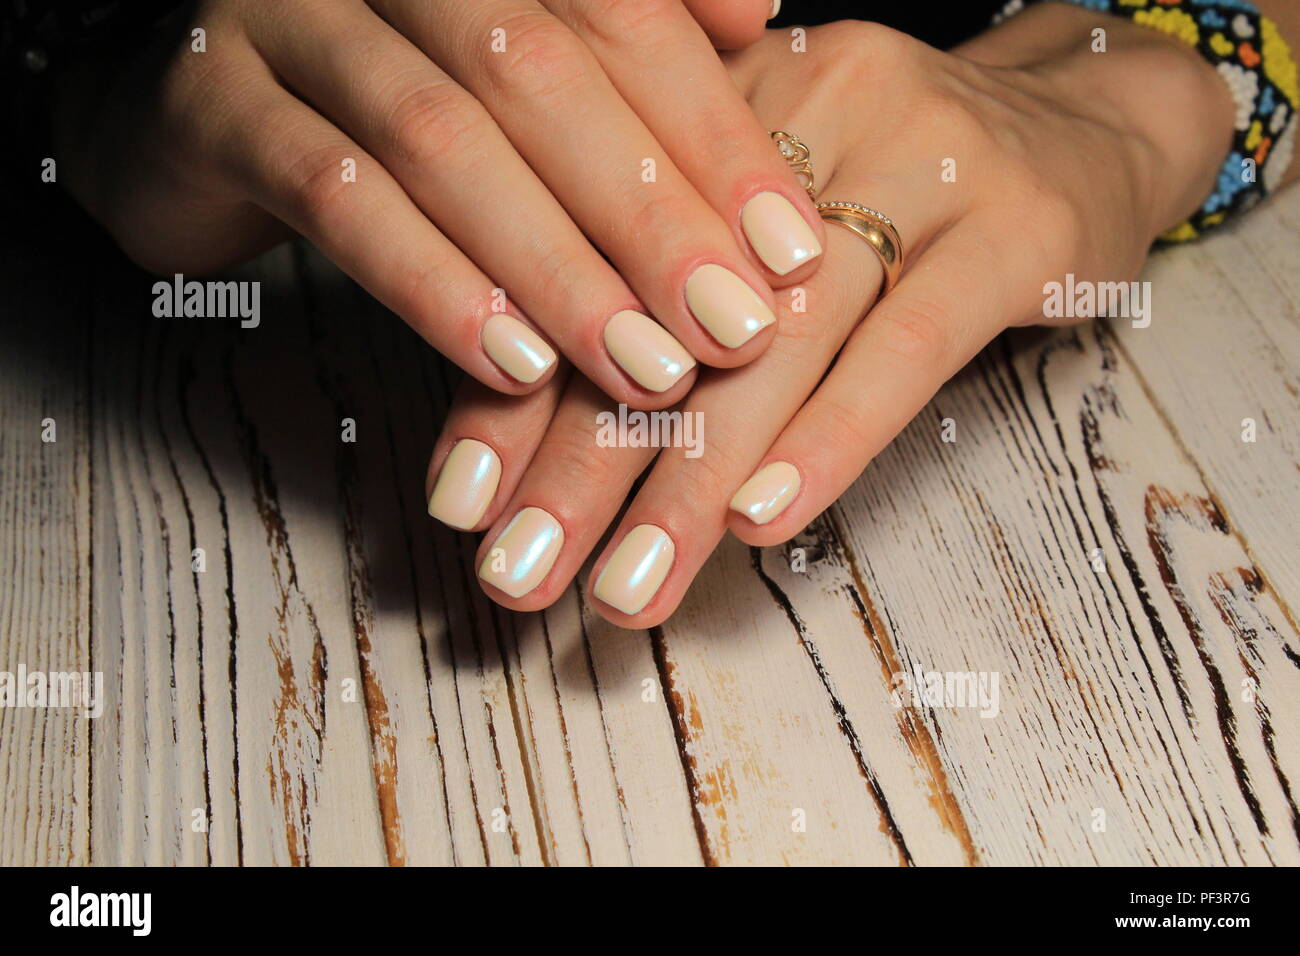 Nails. Beautiful female hand with colorful nail design manicure 27604160  Stock Photo at Vecteezy